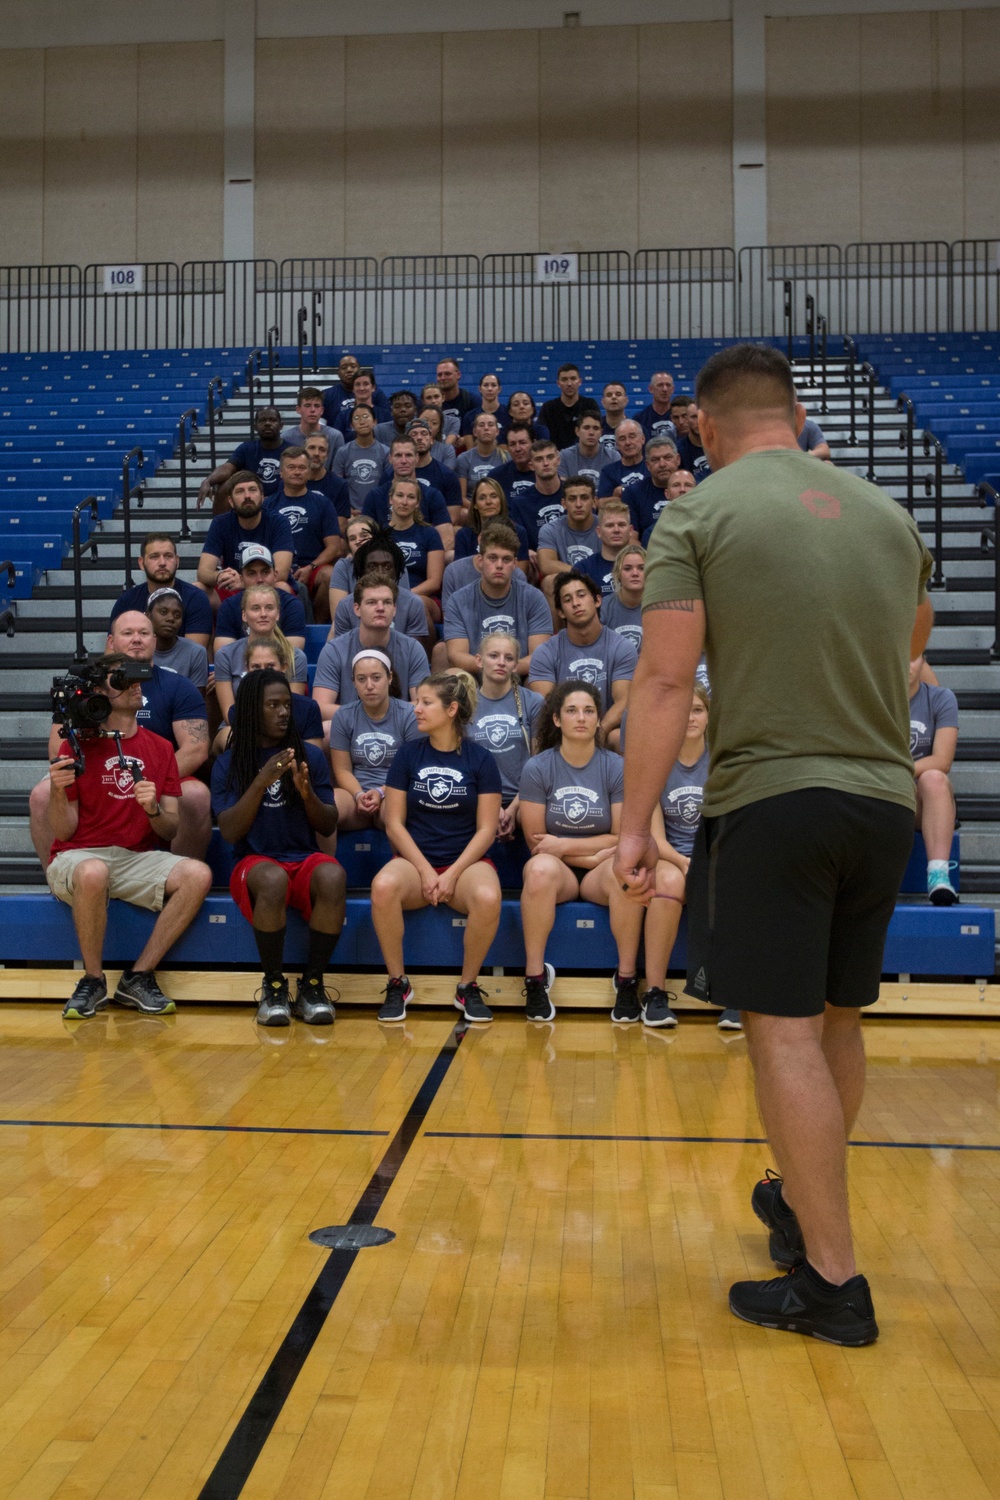 Students learn leadership at the Battles Won Academy